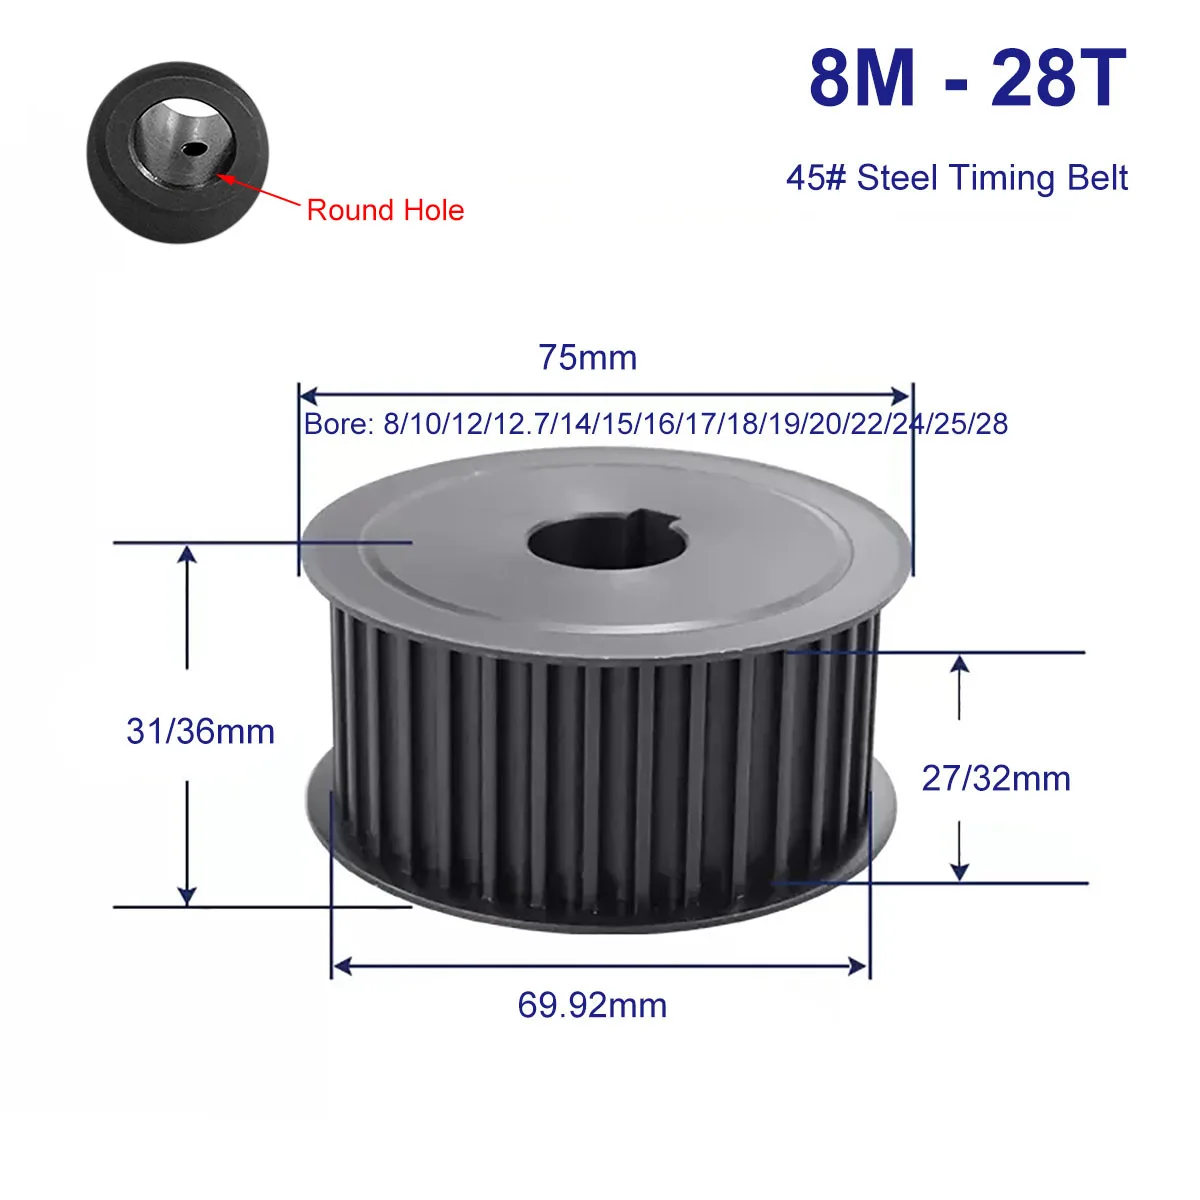 

HTD8M 28 Teeth Synchronous Pulley 45# Steel Slot Width 27/32mm Industrial Transmission Pulley AF 5M-28T Timing Belt Pulley